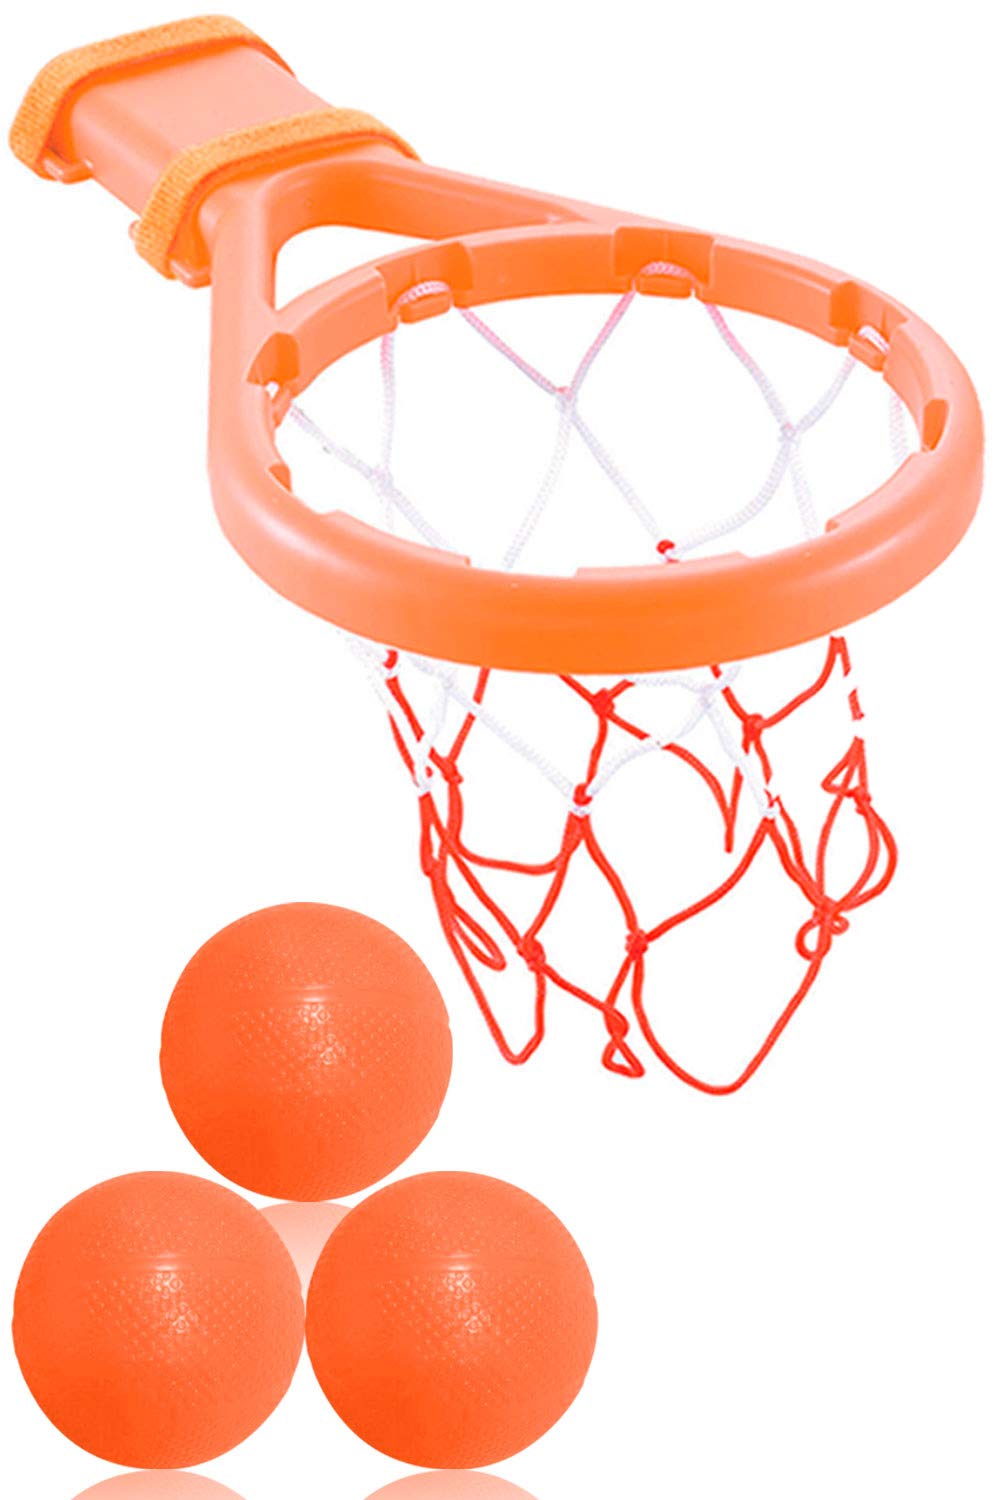 3 Bees & Me Bath Toy Basketball Hoop & Balls Set for Boys and Girls - Kid & Toddler Bath Toys Gift